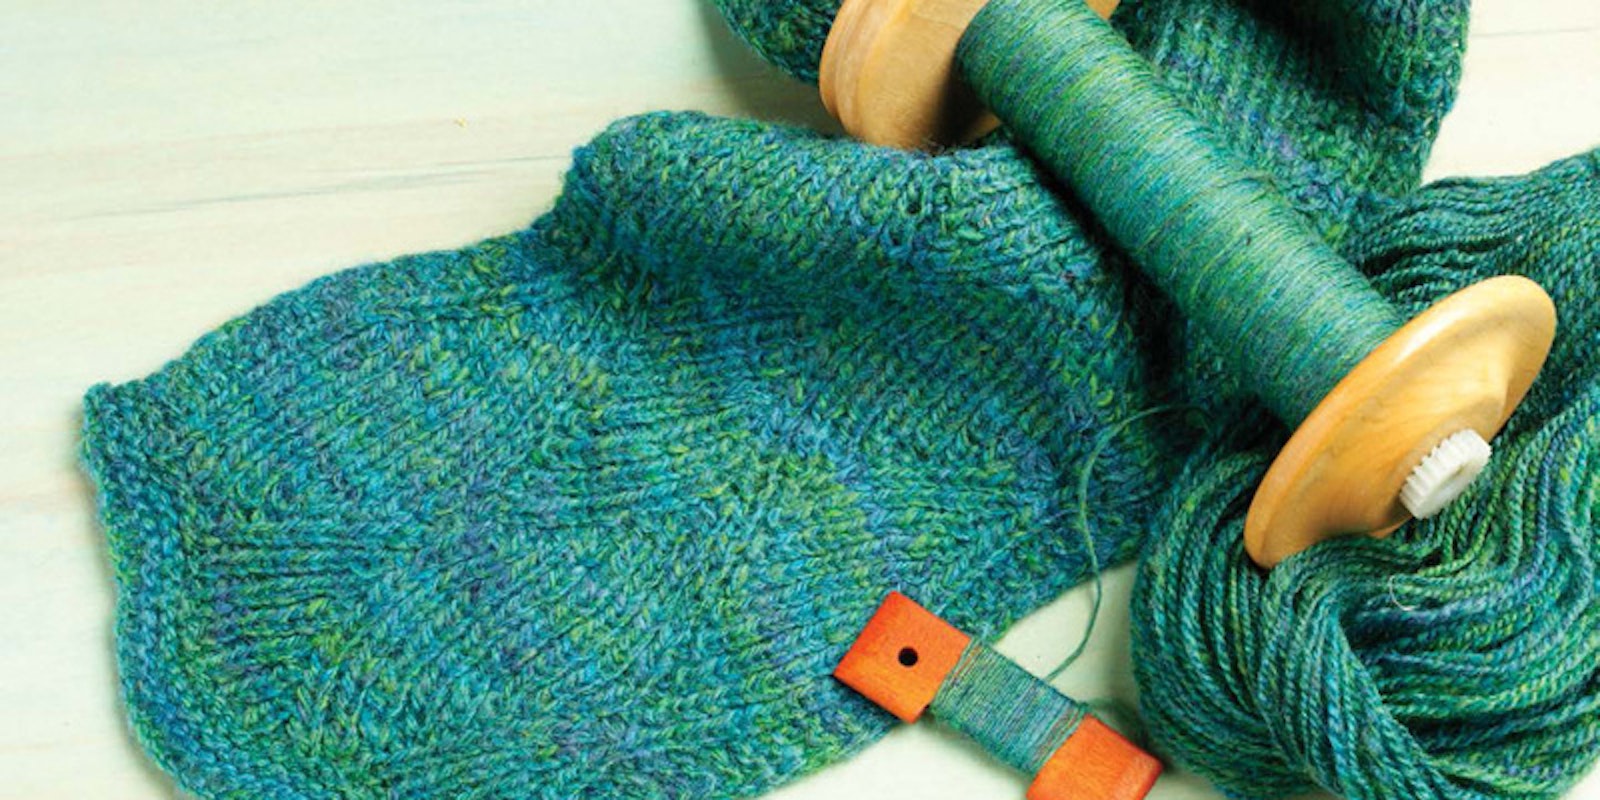 Knitting with Handspun Yarn: 3 Things Spinners Can Learn from Knitters